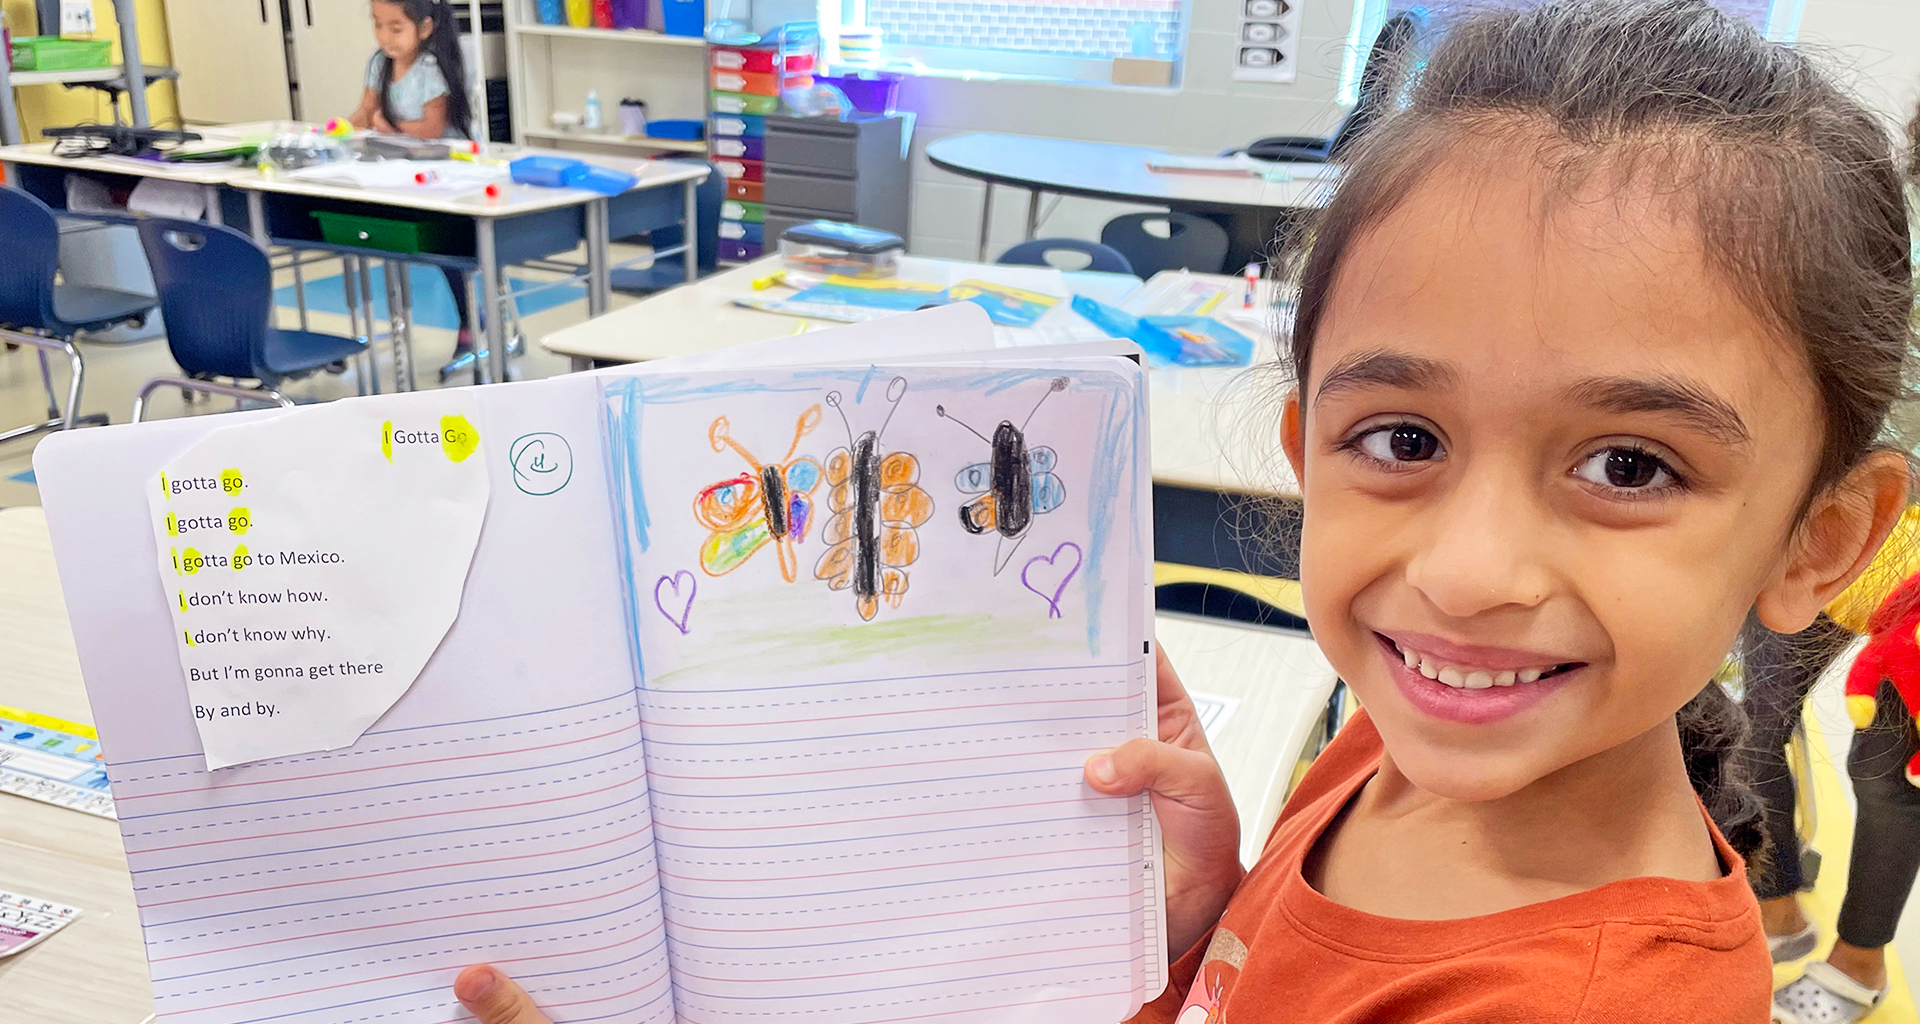 child holding up her notebook showing the story she made.